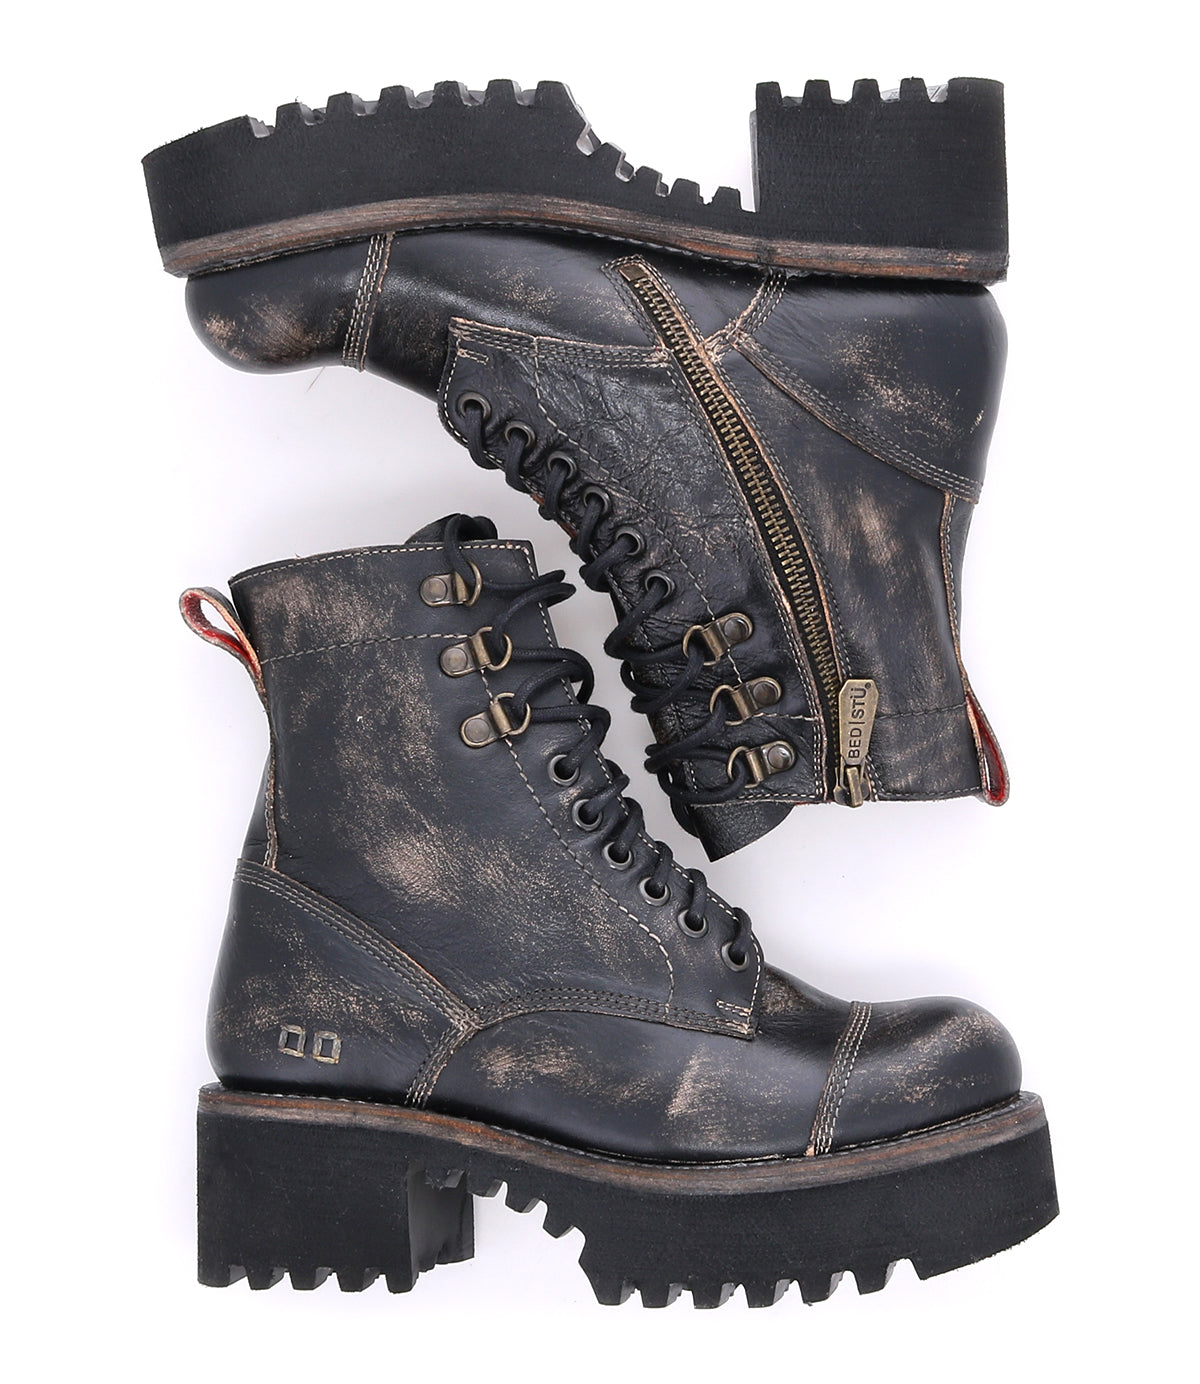 A pair of Bed Stu Prudence Hi black leather combat boots on a white background.